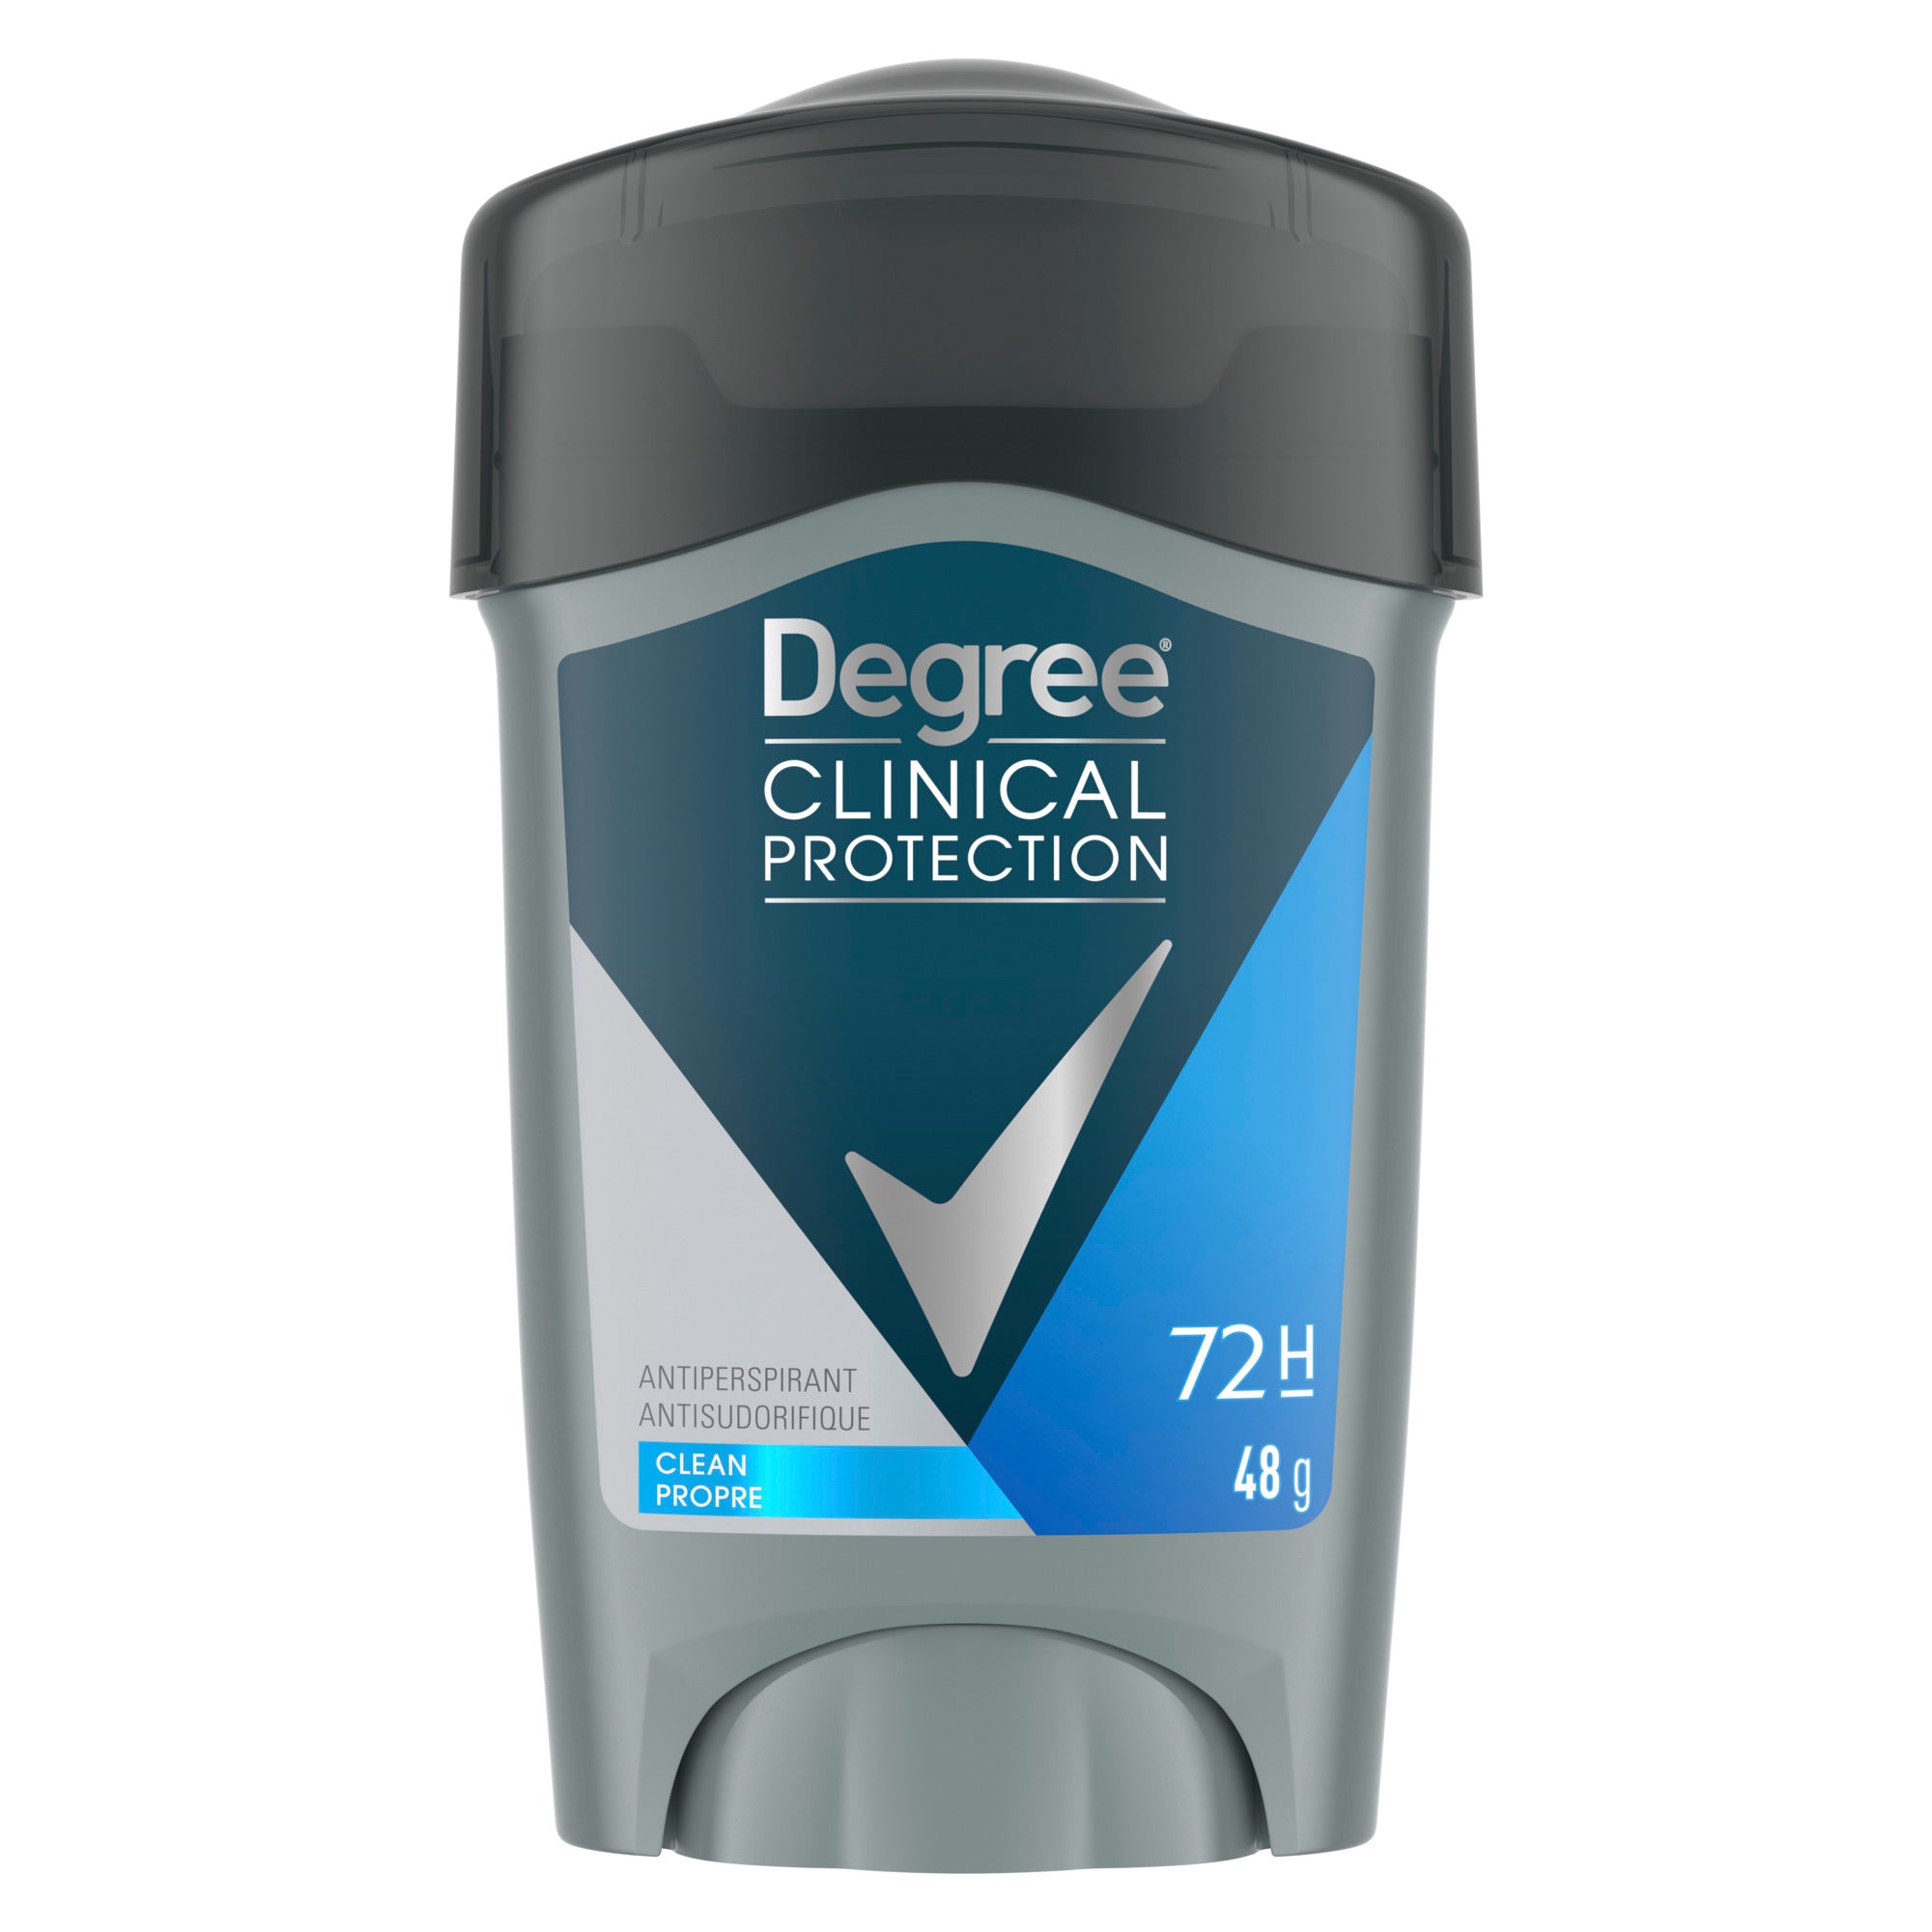 Showing the front angle view of the Degree Men Clinical Protection Antiperspirant Deodorant Stick 48g product packaging.